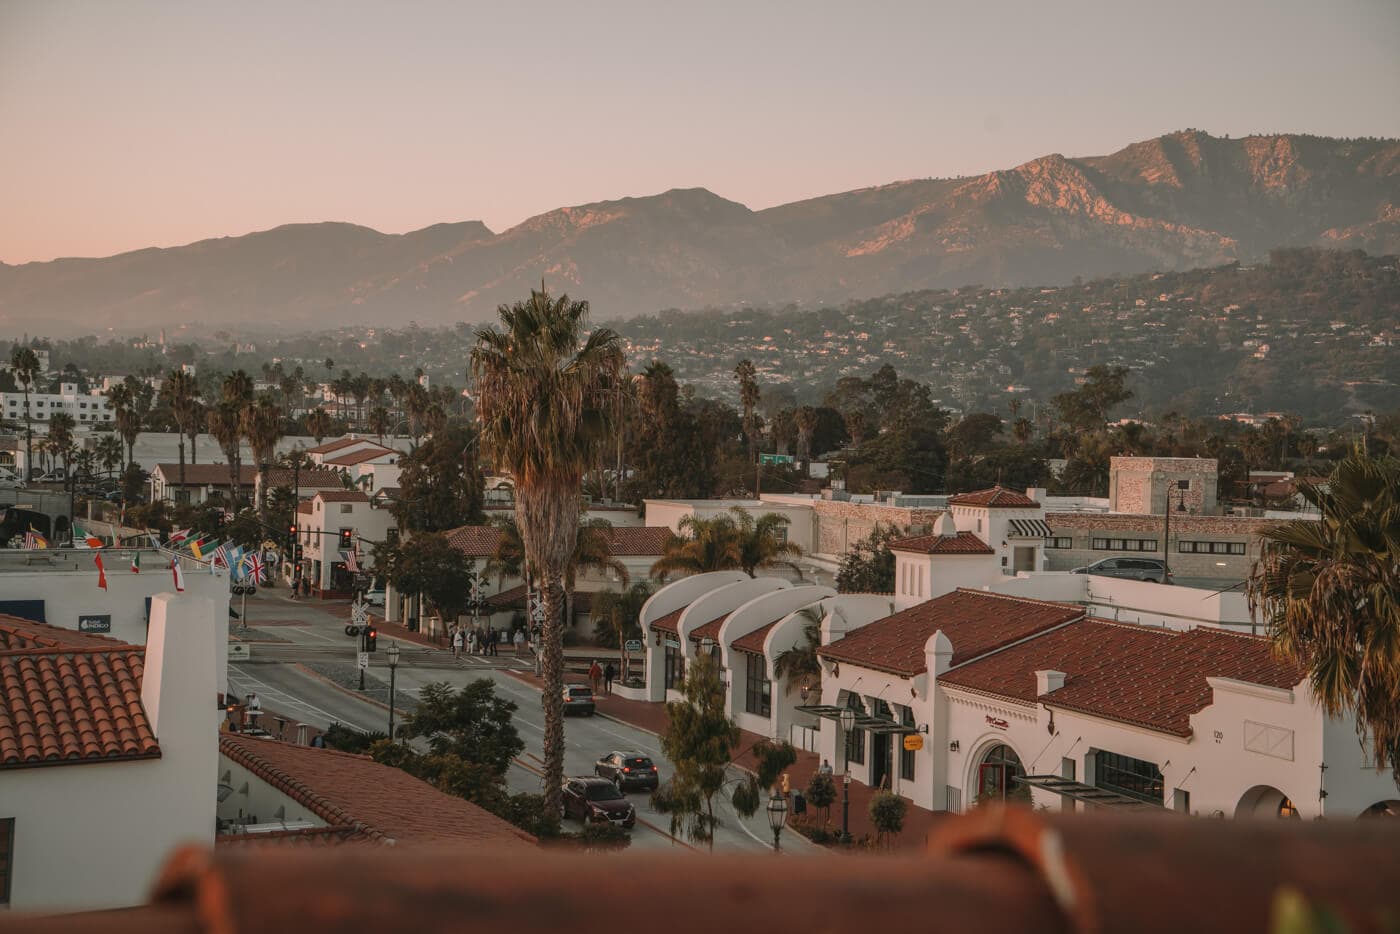 Looking out over Santa Barbara's downtown